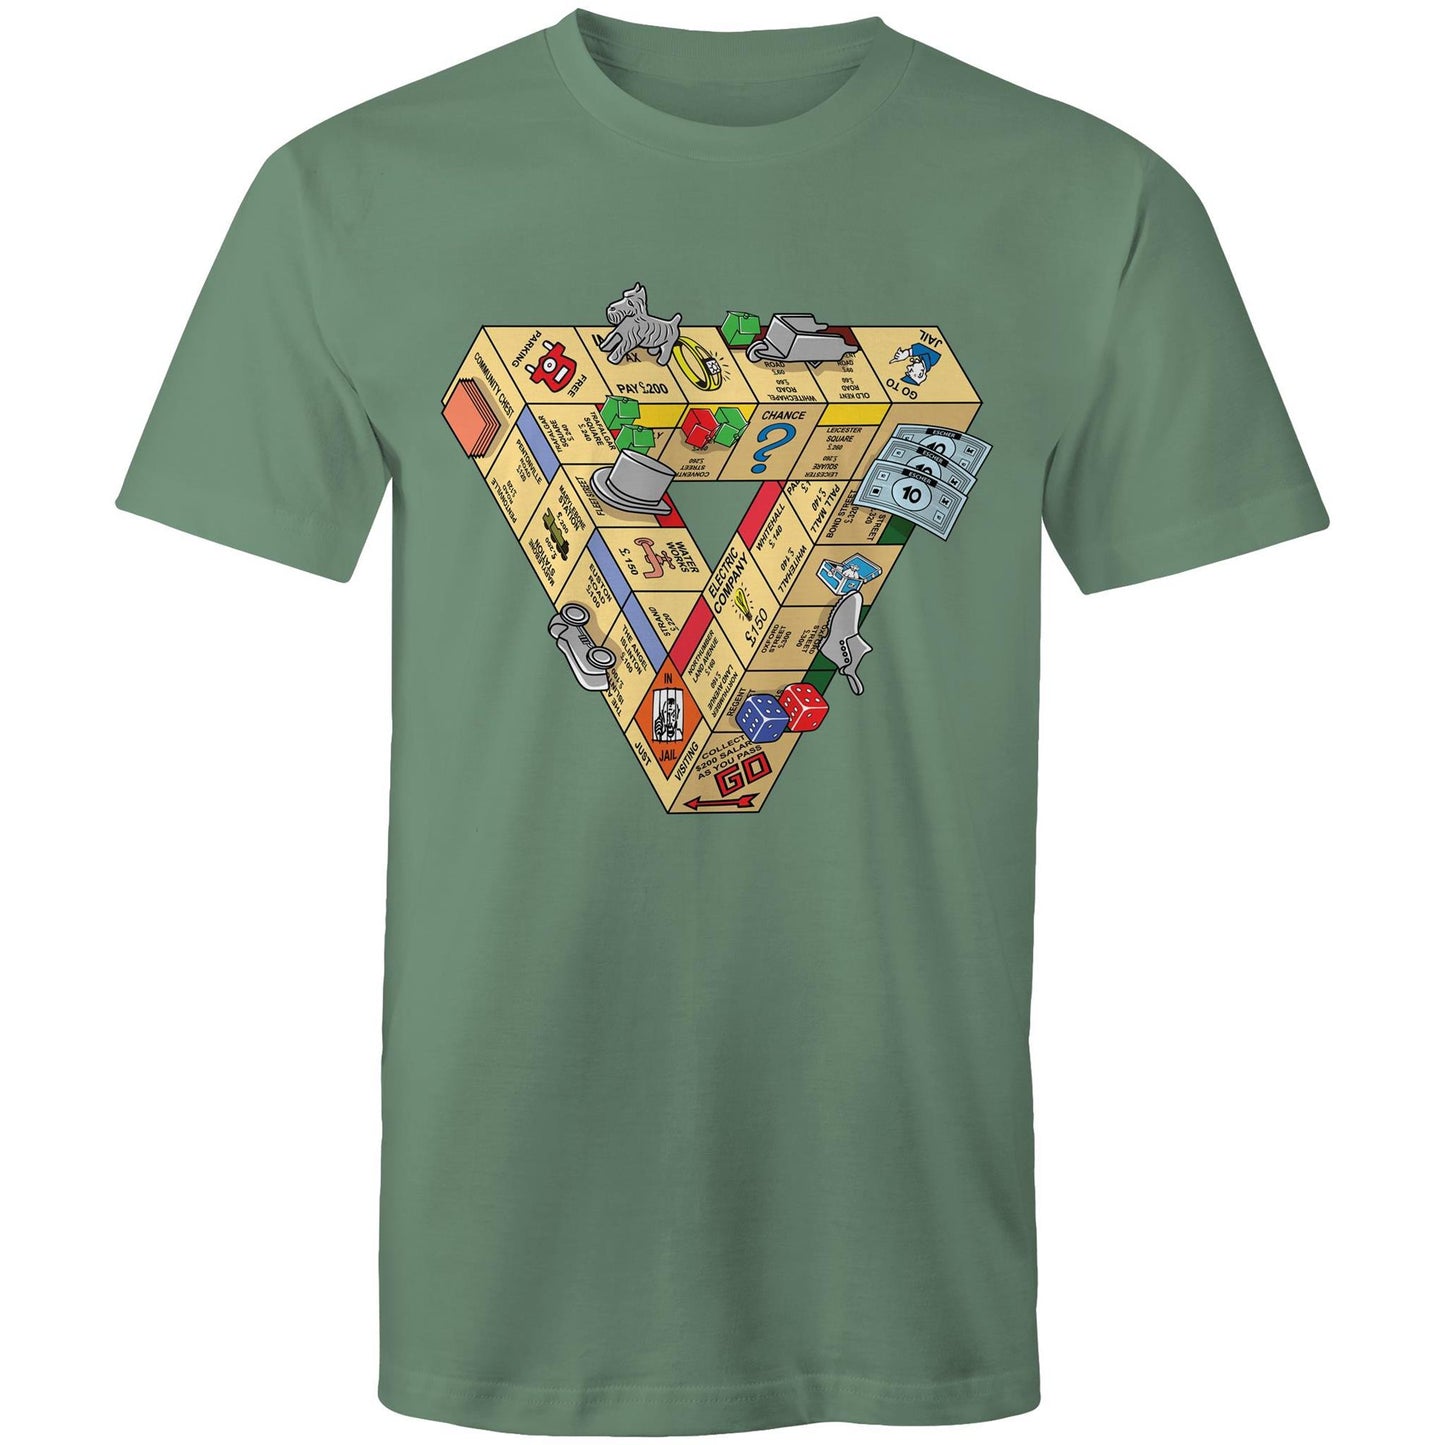 The Impossible Board Game - Men's T-Shirt